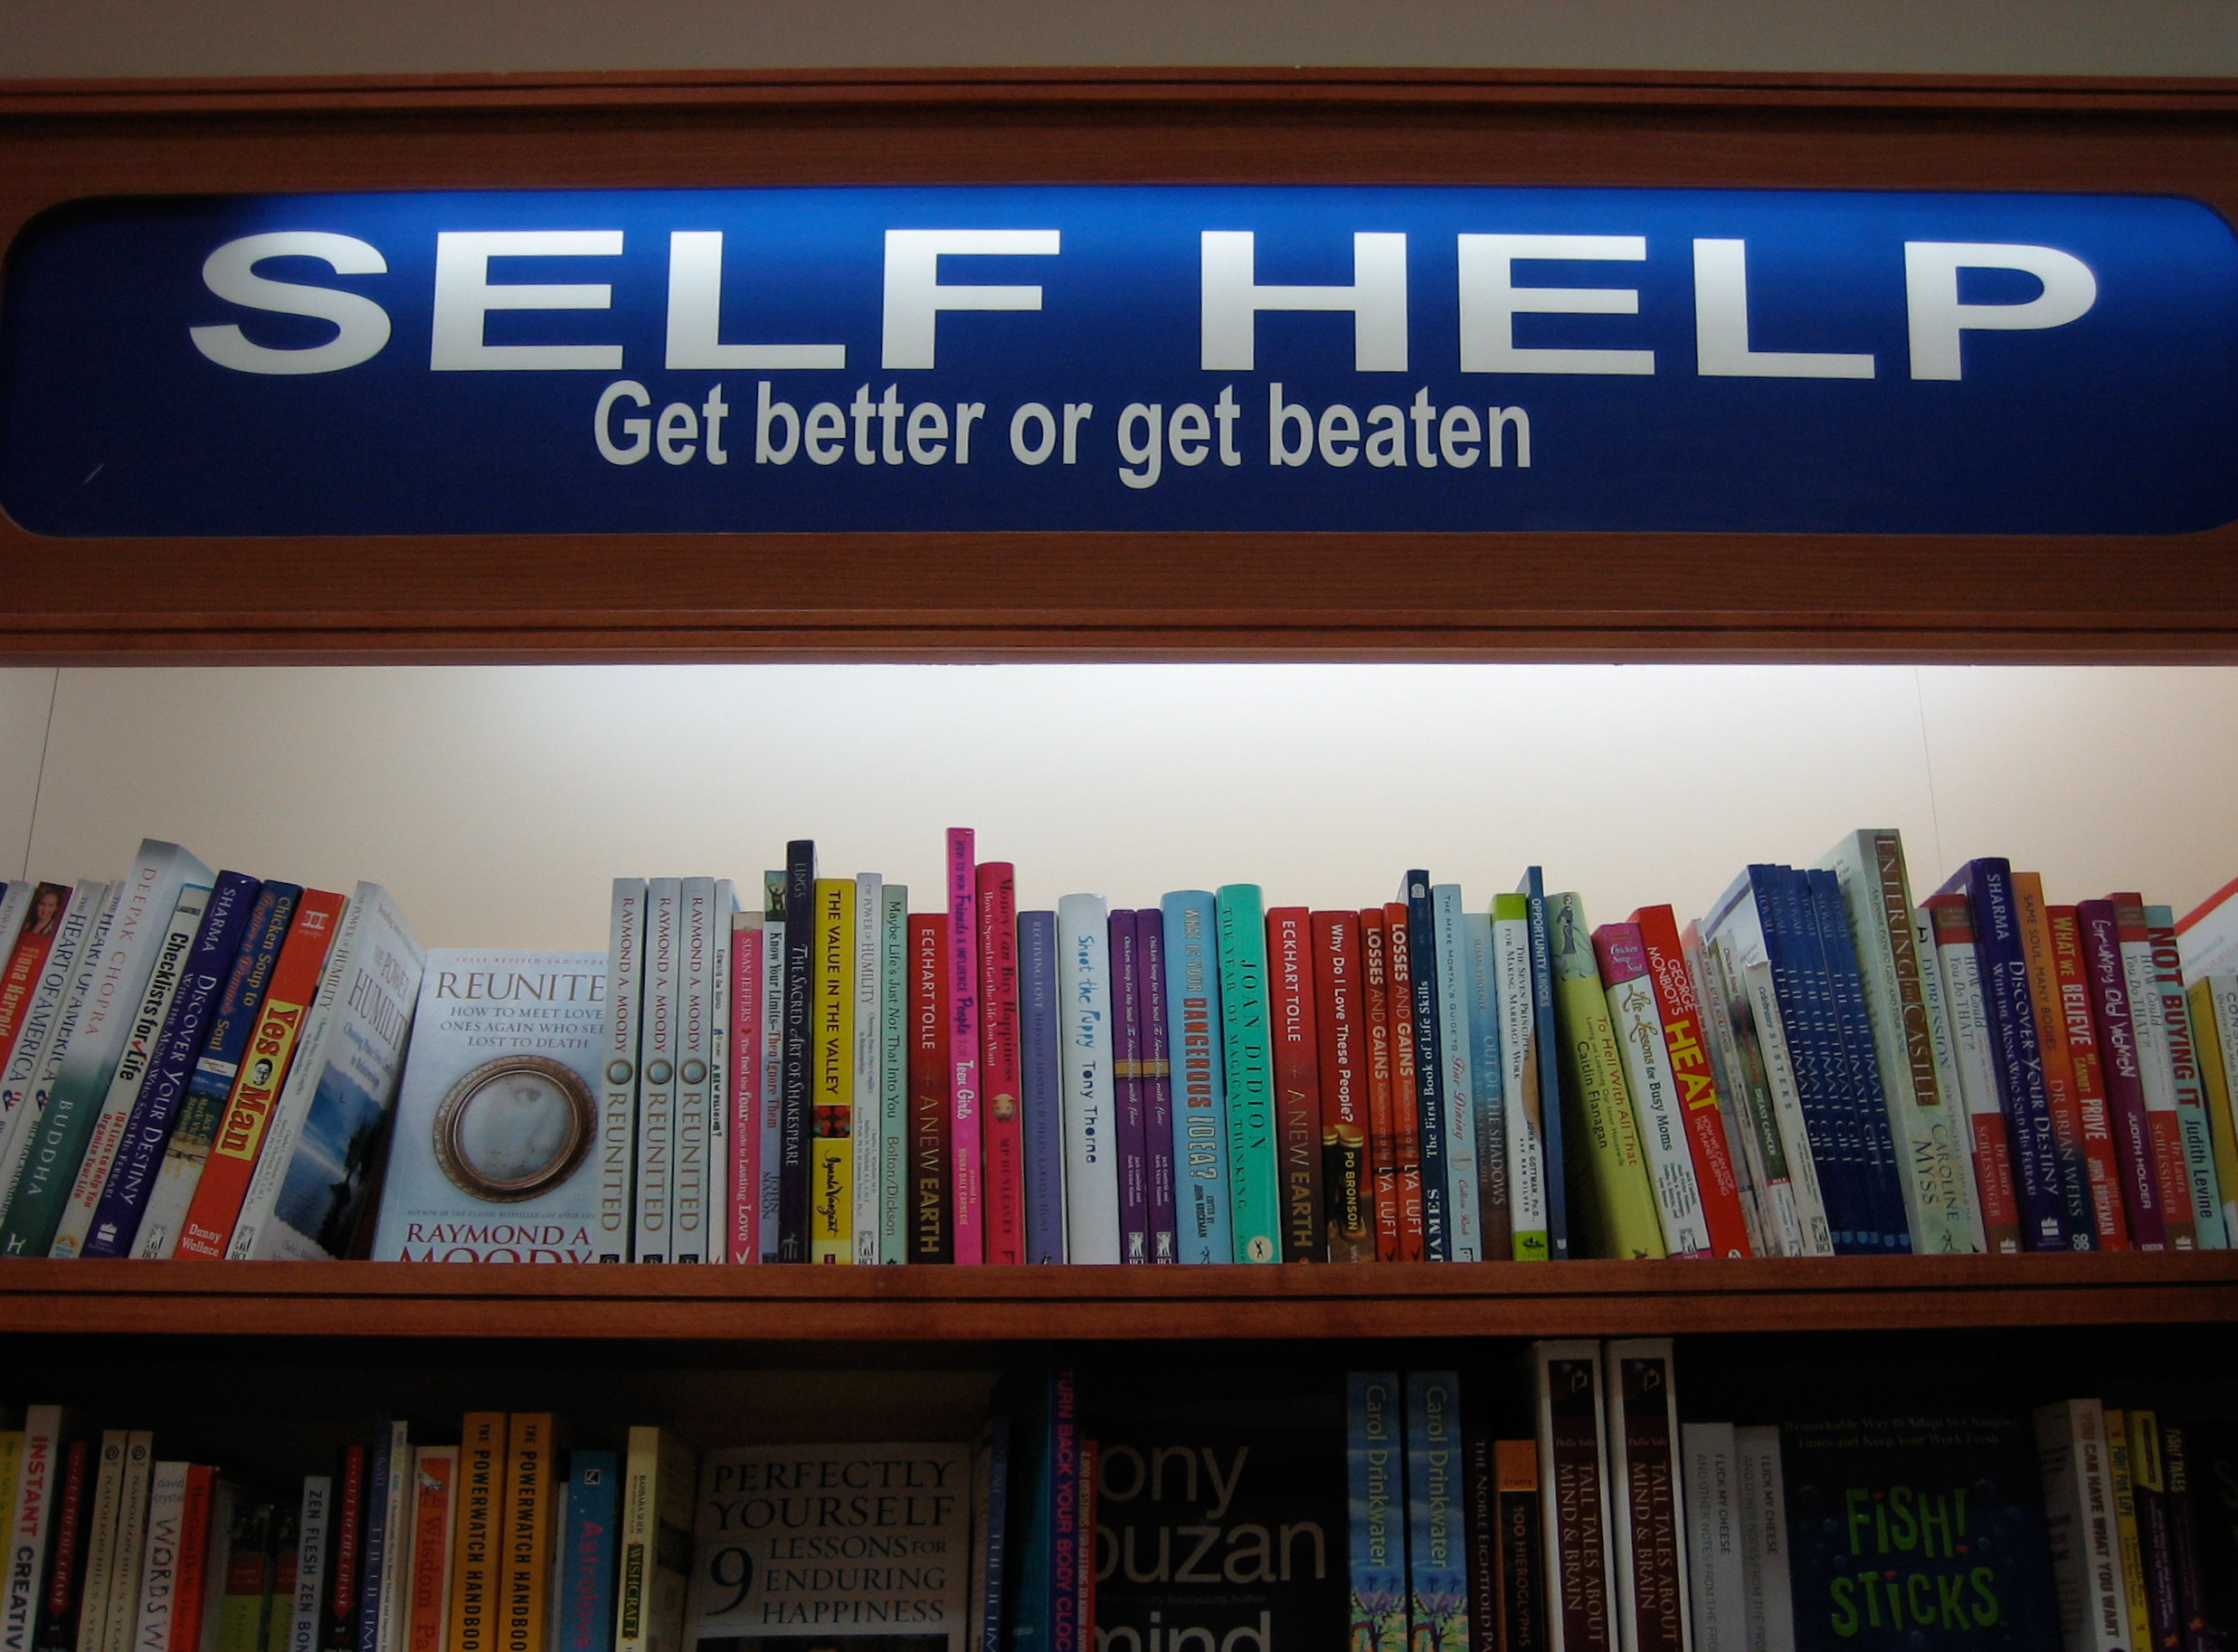 This is an image of the 'self help' section of a library with a sign that says 'Get better or get beaten'